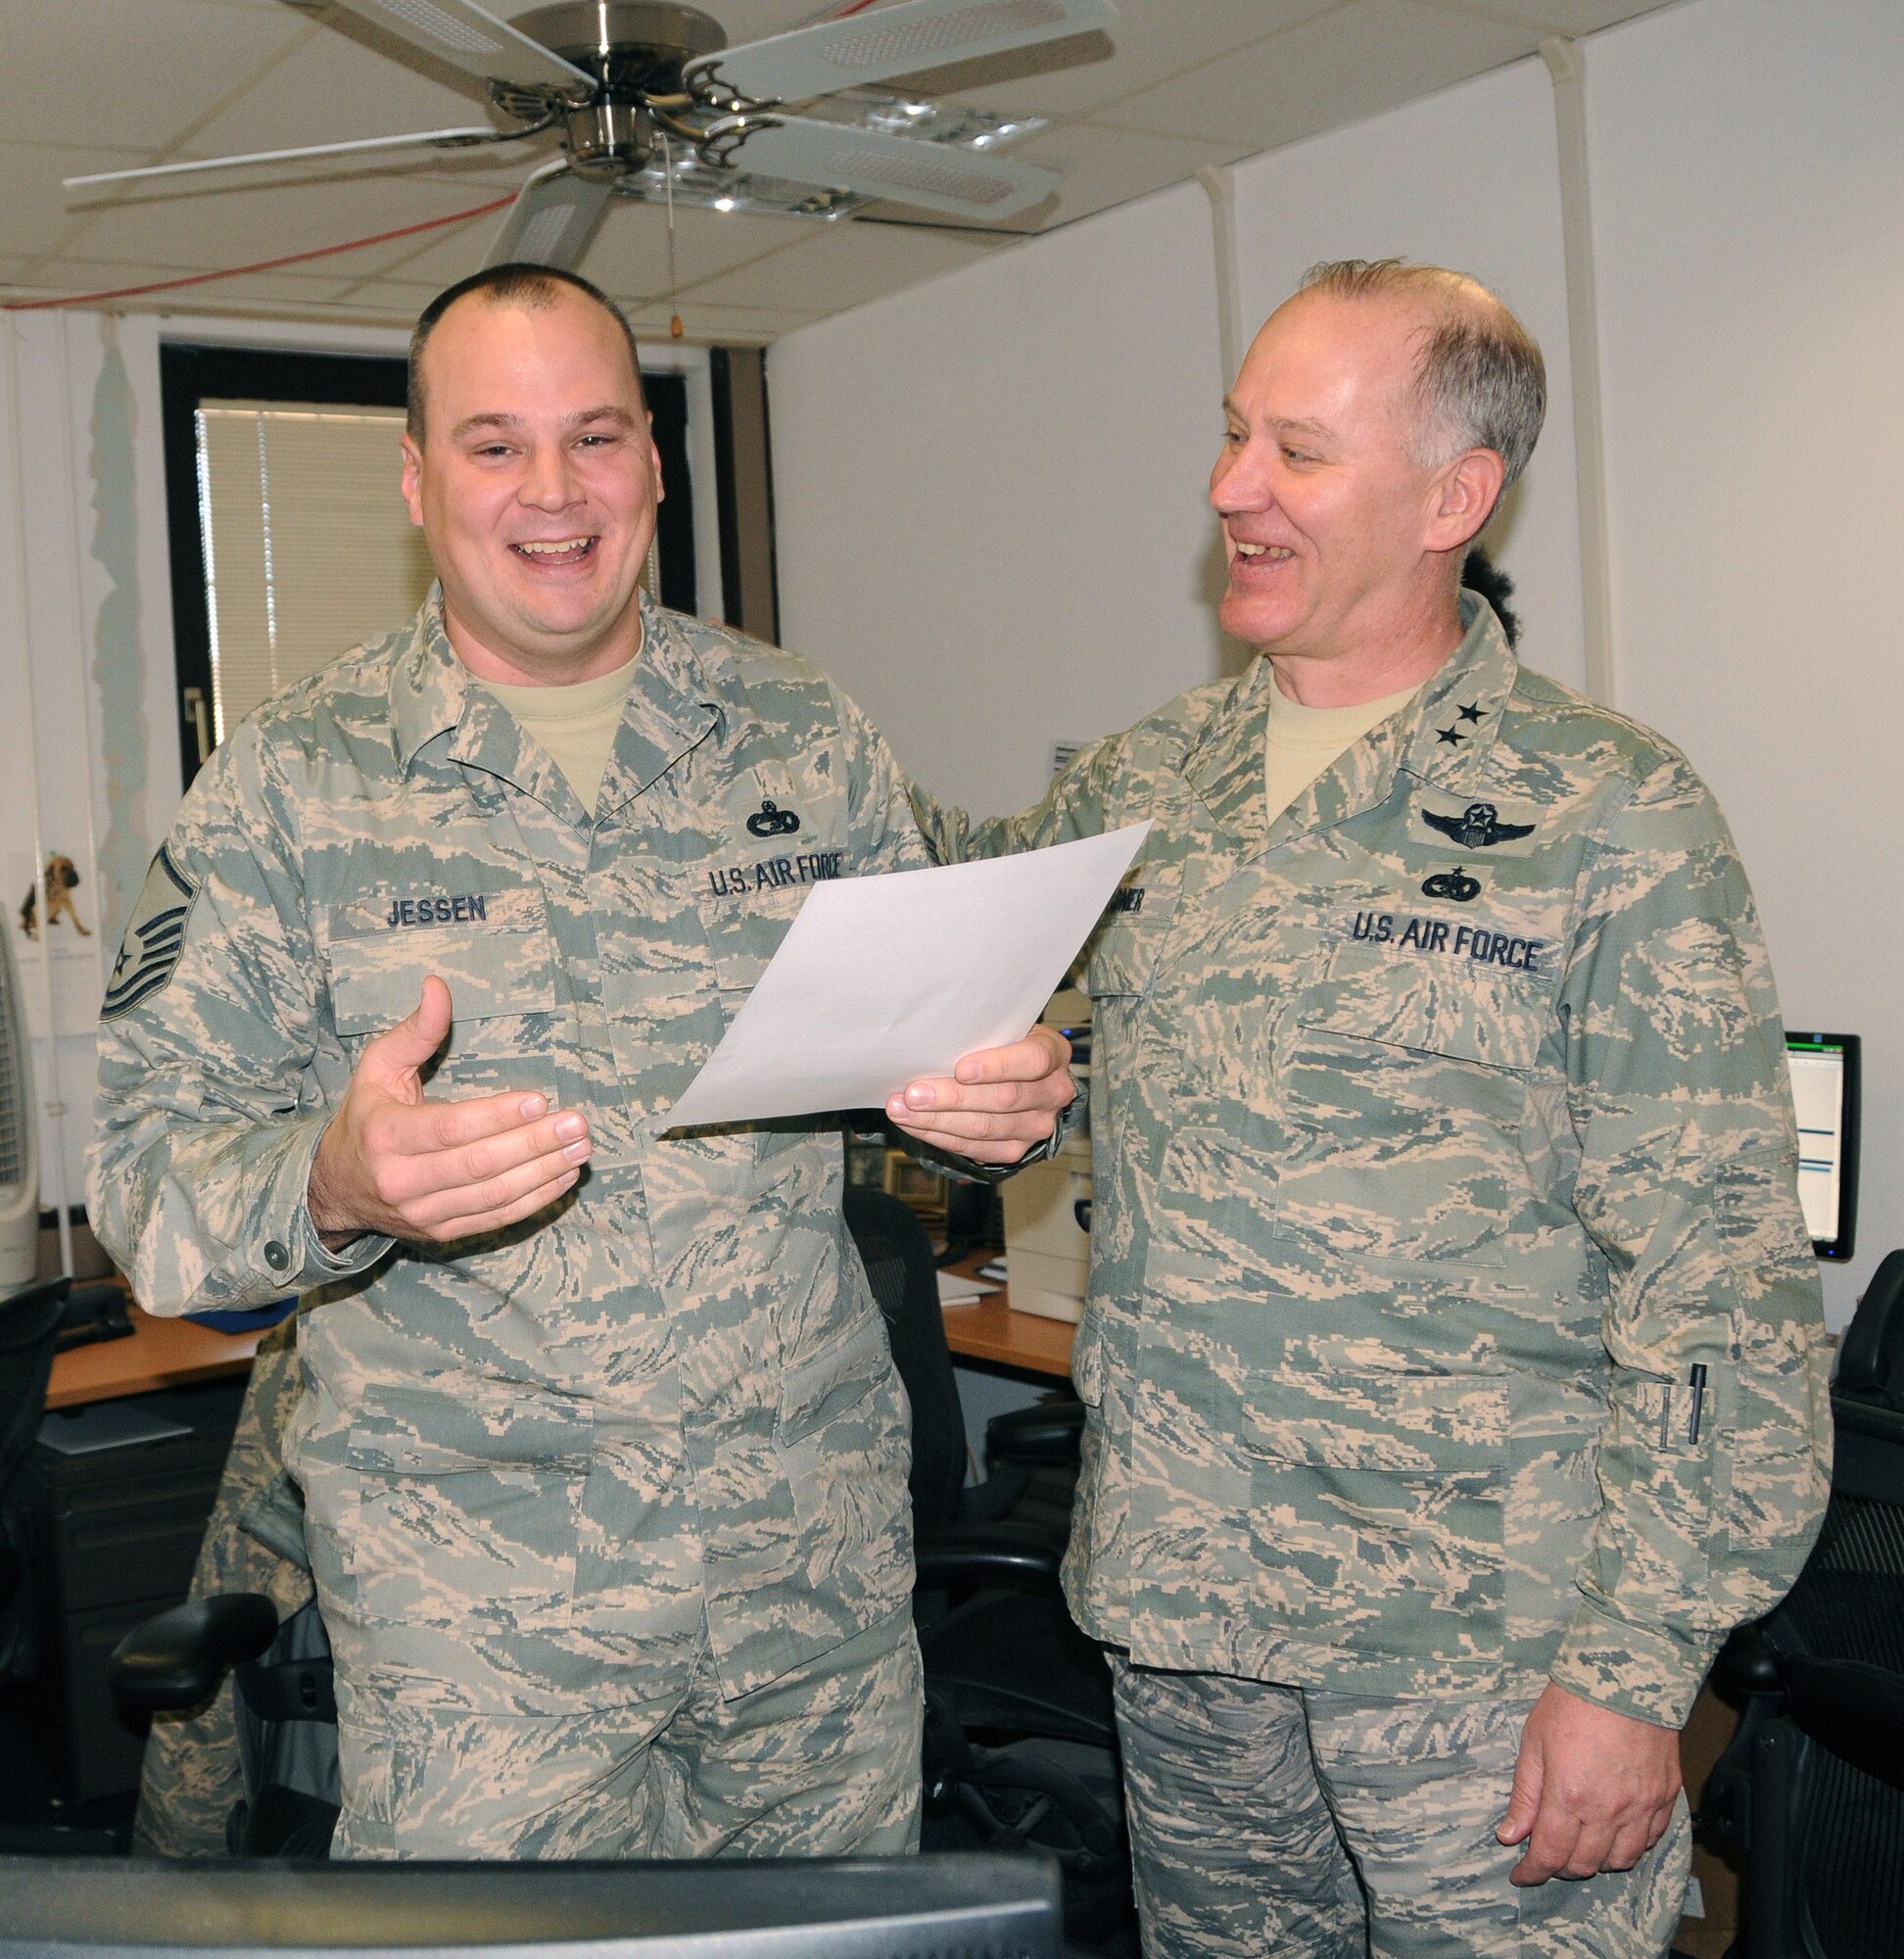 Senior Master Sgt. (select) Scott Jessen, 17th Air Force Air Transportation manager, learns about his promotion to E-8 through Maj. Gen. Ronald Ladnier, 17th Air Force commander, March 4. Six master sergeants from 17th AF were selected for promotion to senior master sergeant. (U.S. Air Force photo by Staff Sgt. Stefanie Torres)